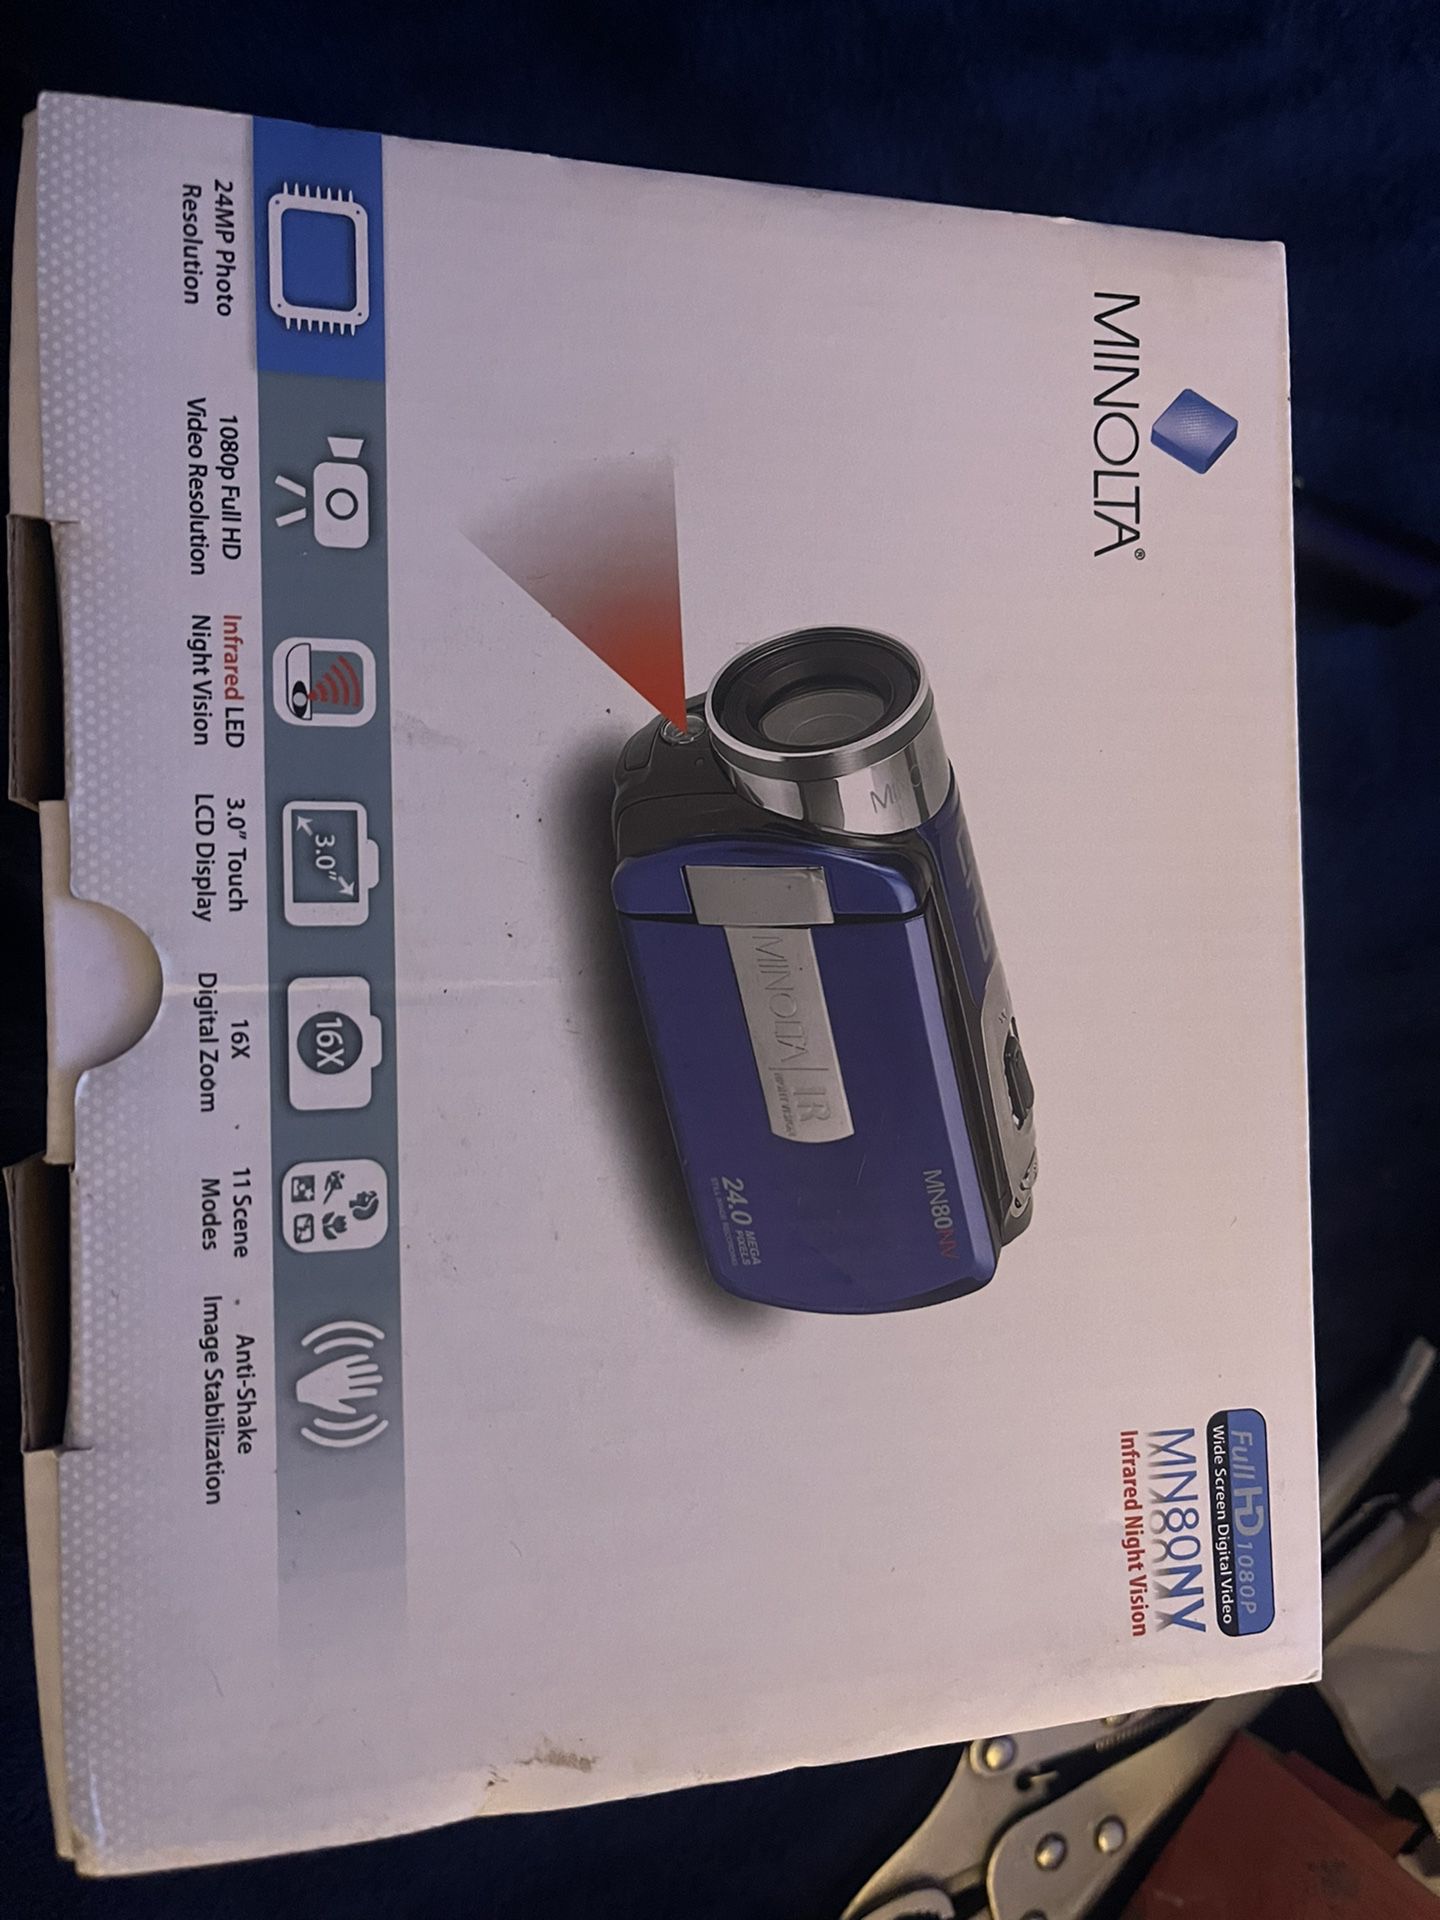 New Nightvision Camcorder 